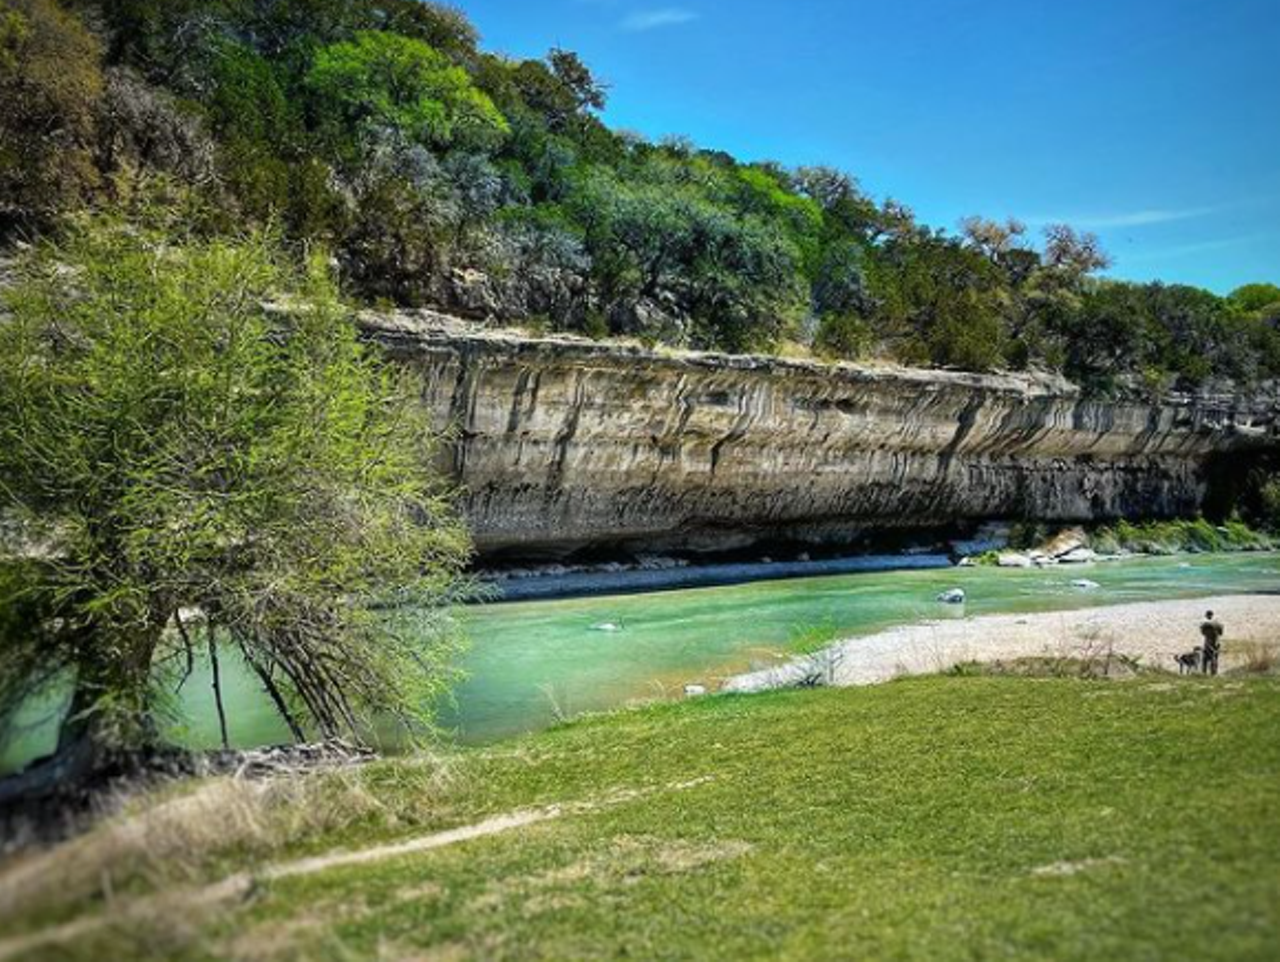 Guadalupe State Park
3350 Park Road 31, Spring Branch, (830) 438-2656, tpwd.texas.gov
Swim, tube, canoe, or fish — or do all four! With four miles of river frontage, Guadalupe State Park is sure to make for a full day.
Instagram / renecizio